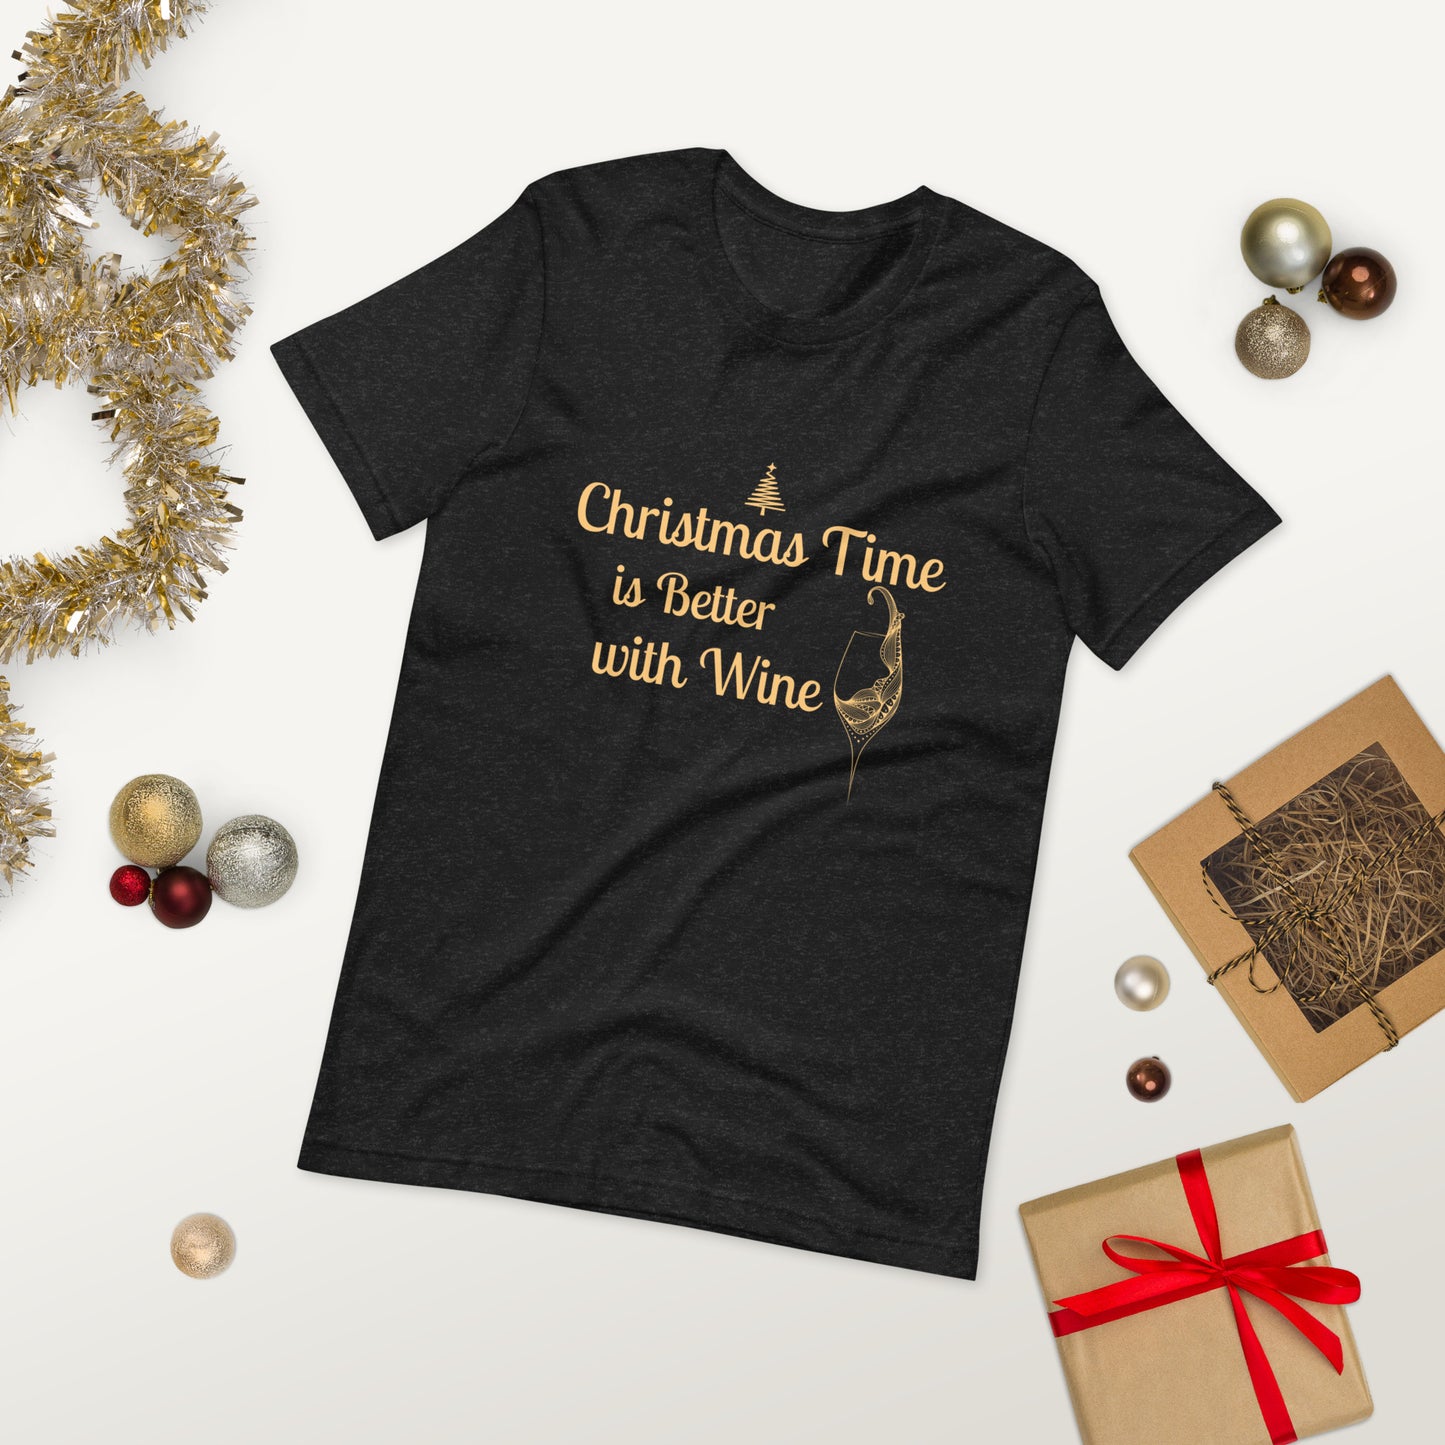 Christmas is Better with Wine t-shirt